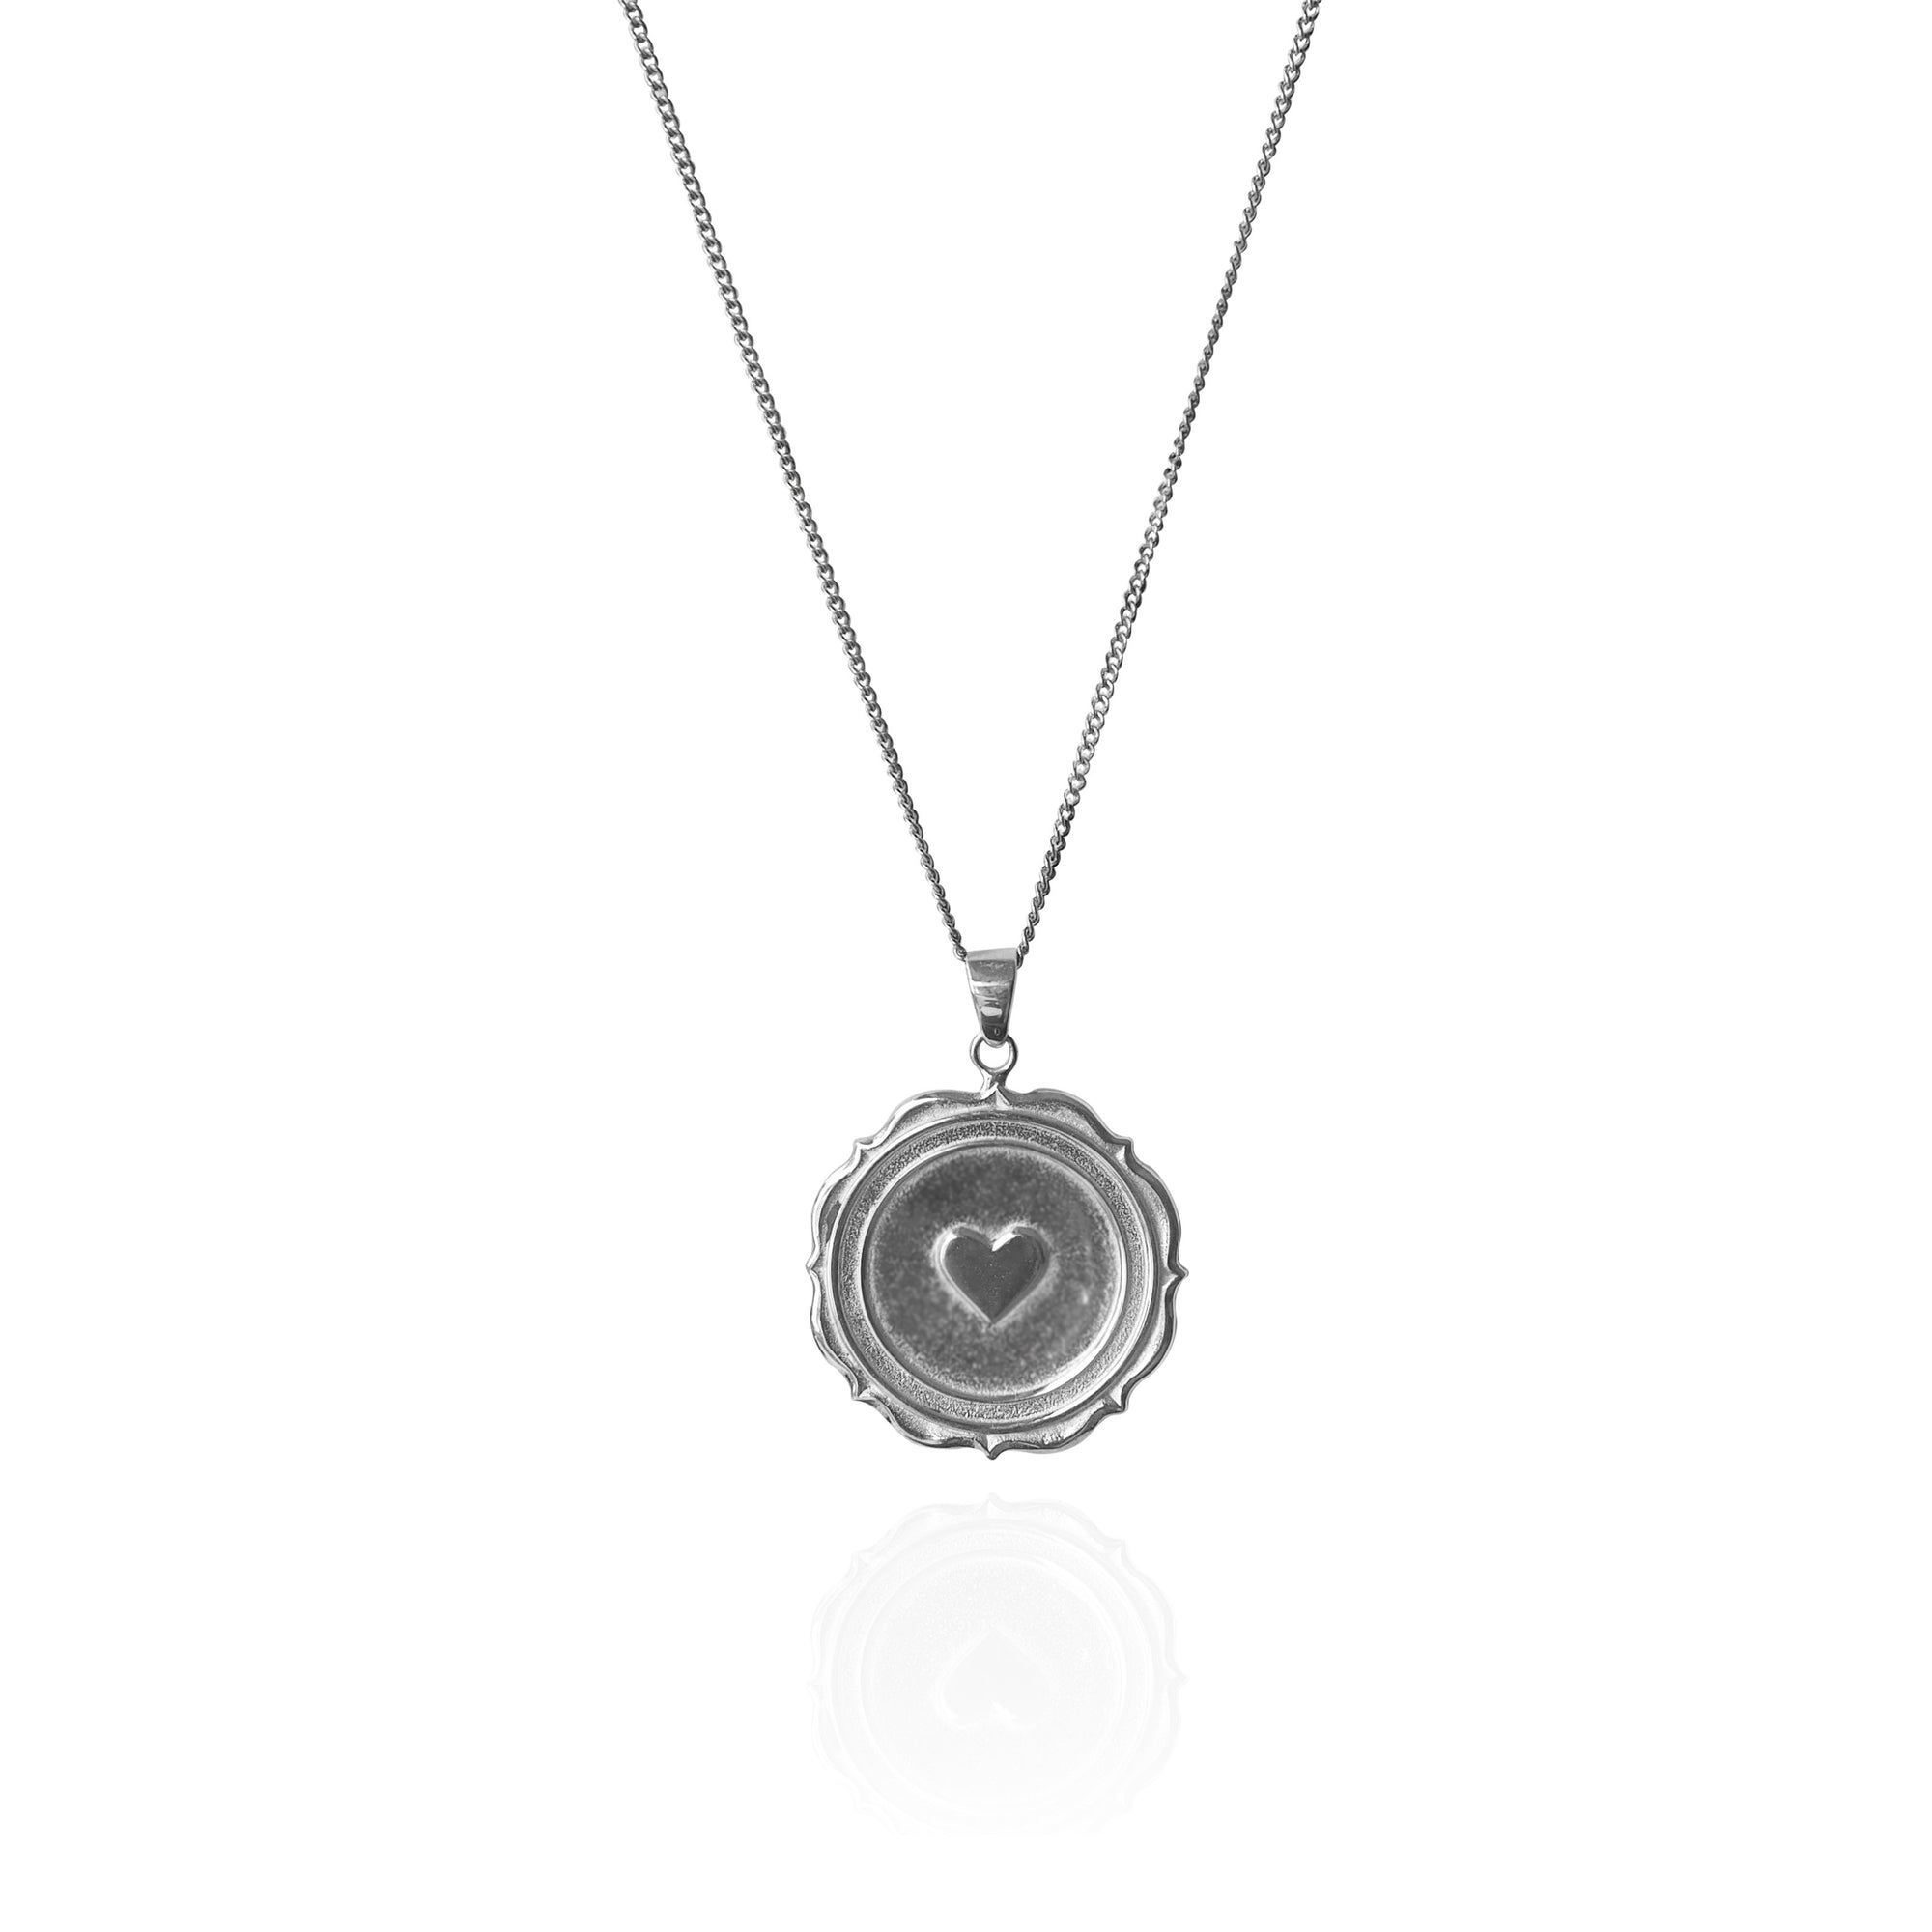 Serena Pendant Sterling Silver Heart Necklace